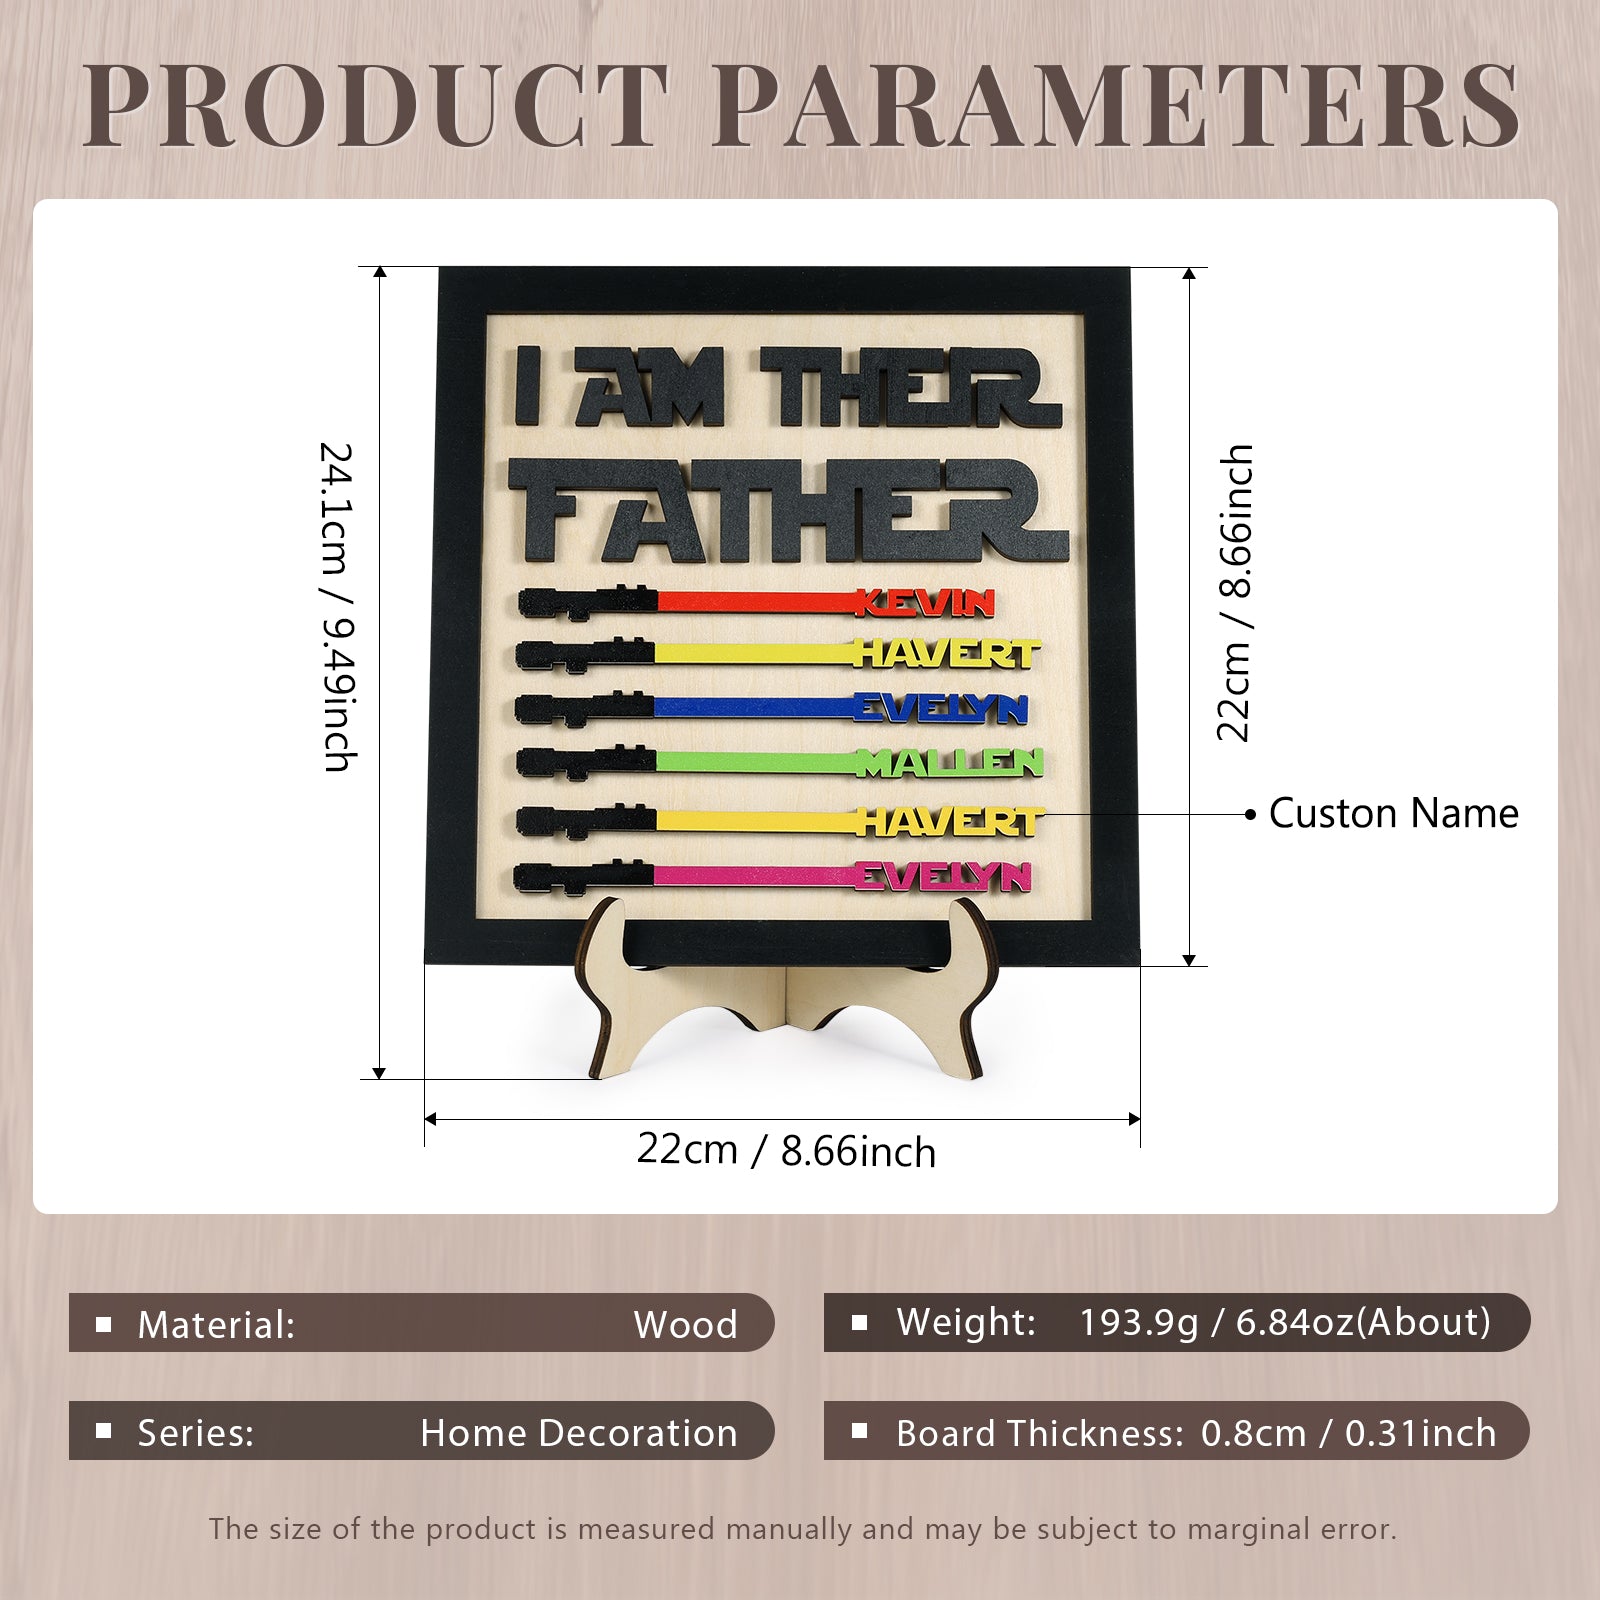 I Am Their Father Wood Desk Sign